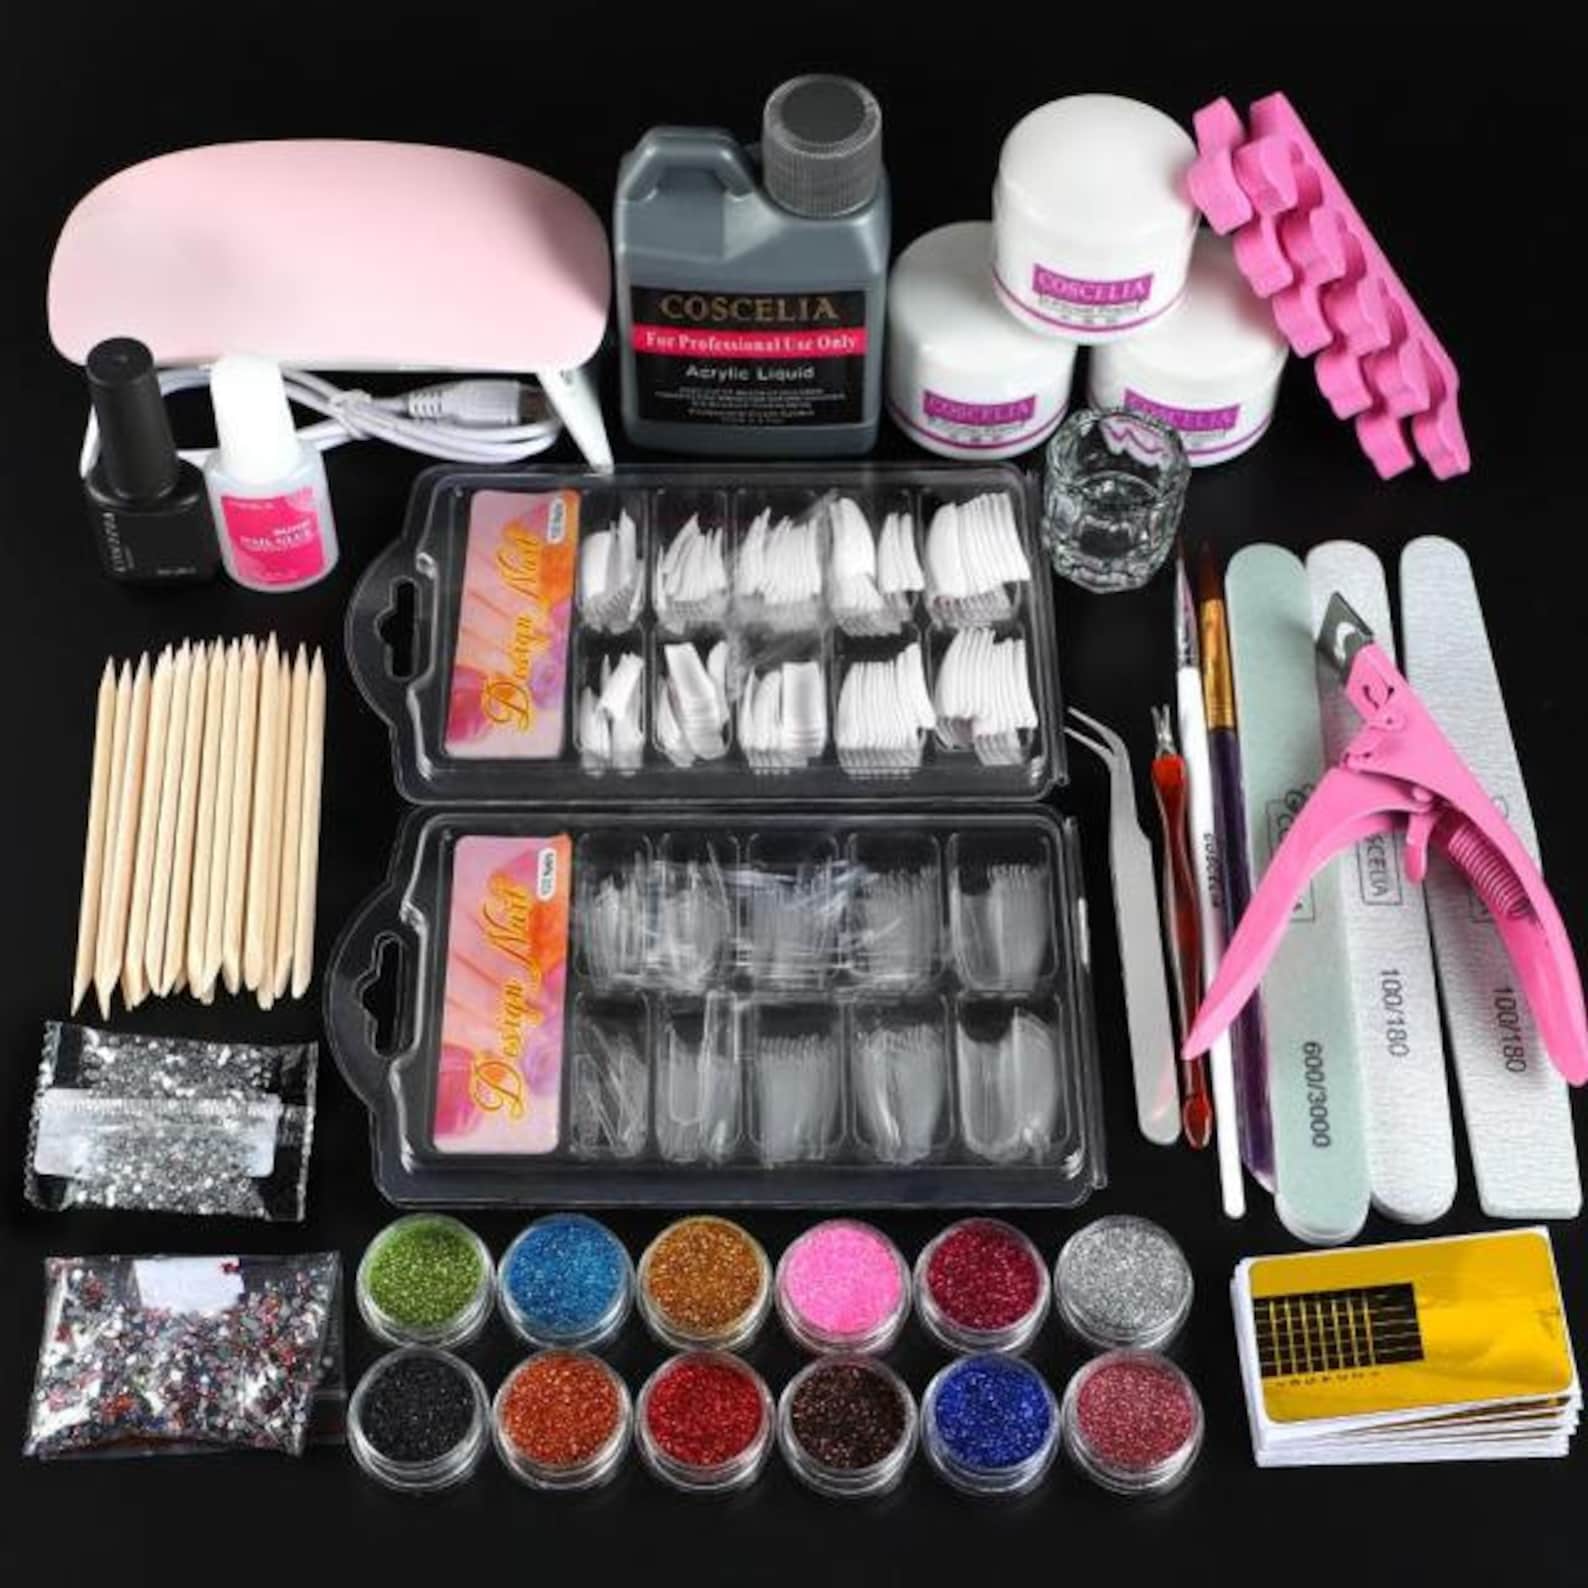 Pro Acrylic Nail Kit With Lamp Dryer Full Manicure Set For Etsy